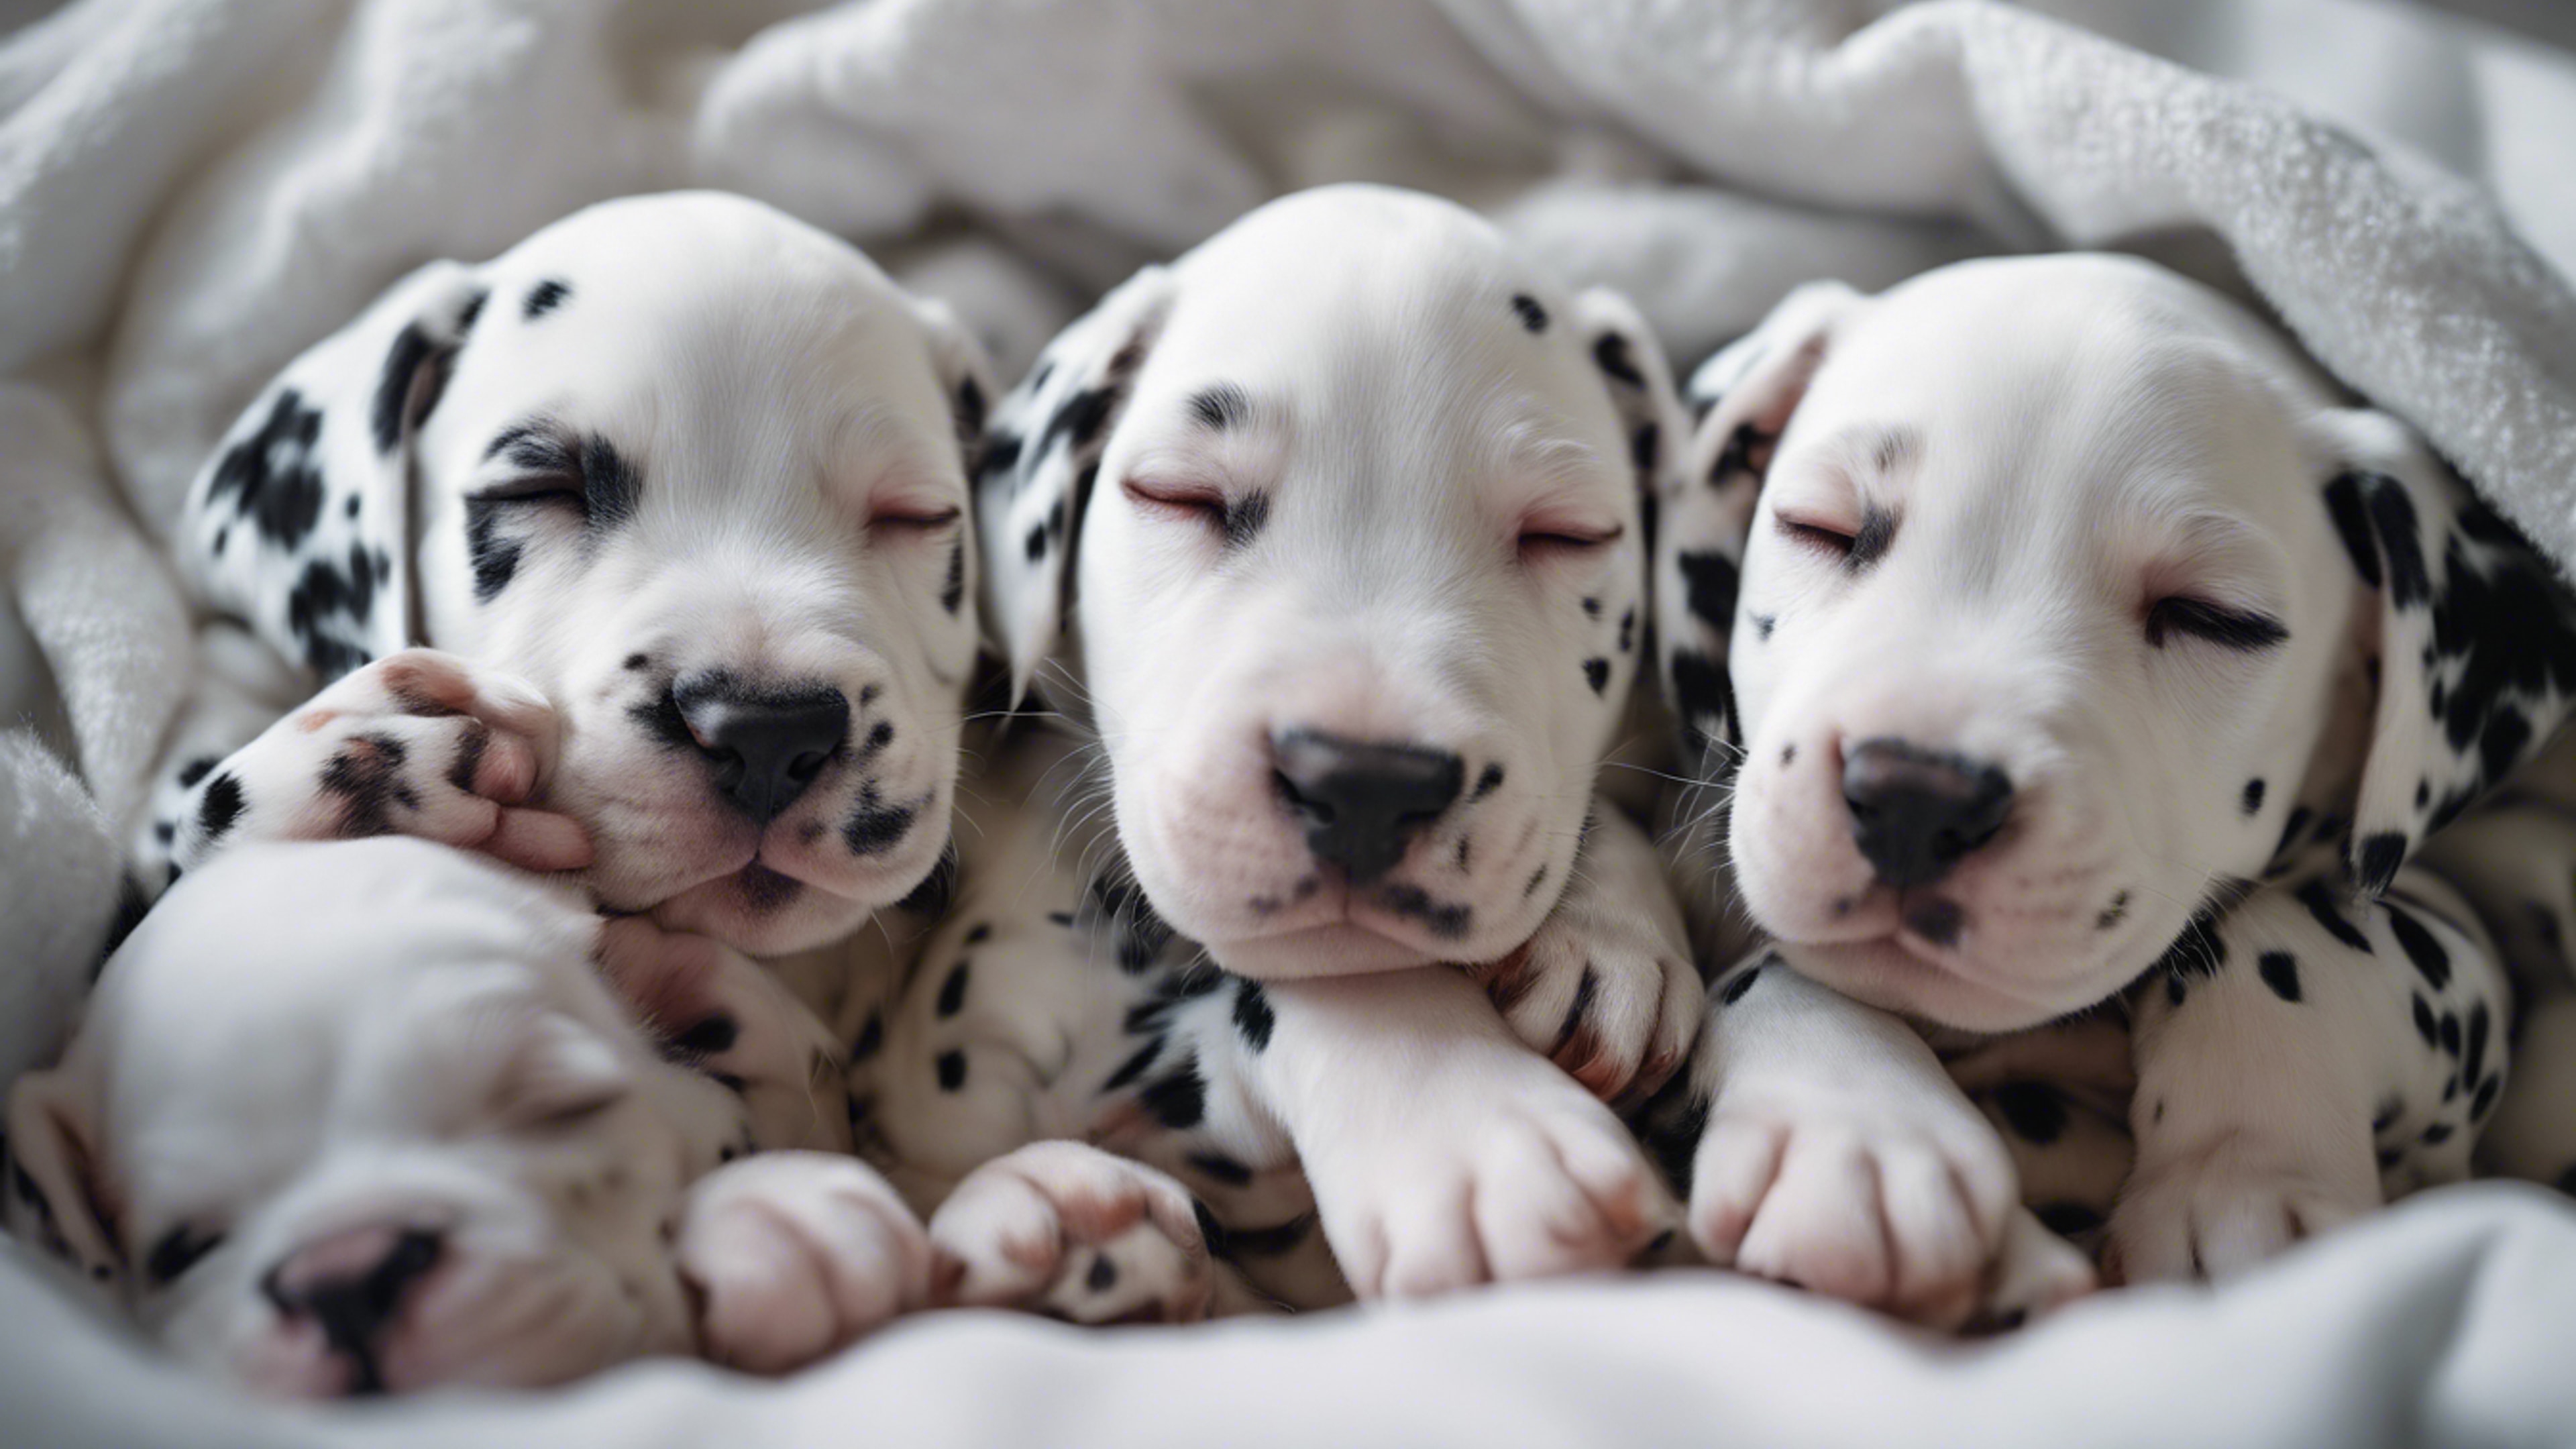 A cluster of sleeping Dalmatian puppies under a cozy white blanket in a nursery room.壁紙[4a5dc312c1f344509ca9]